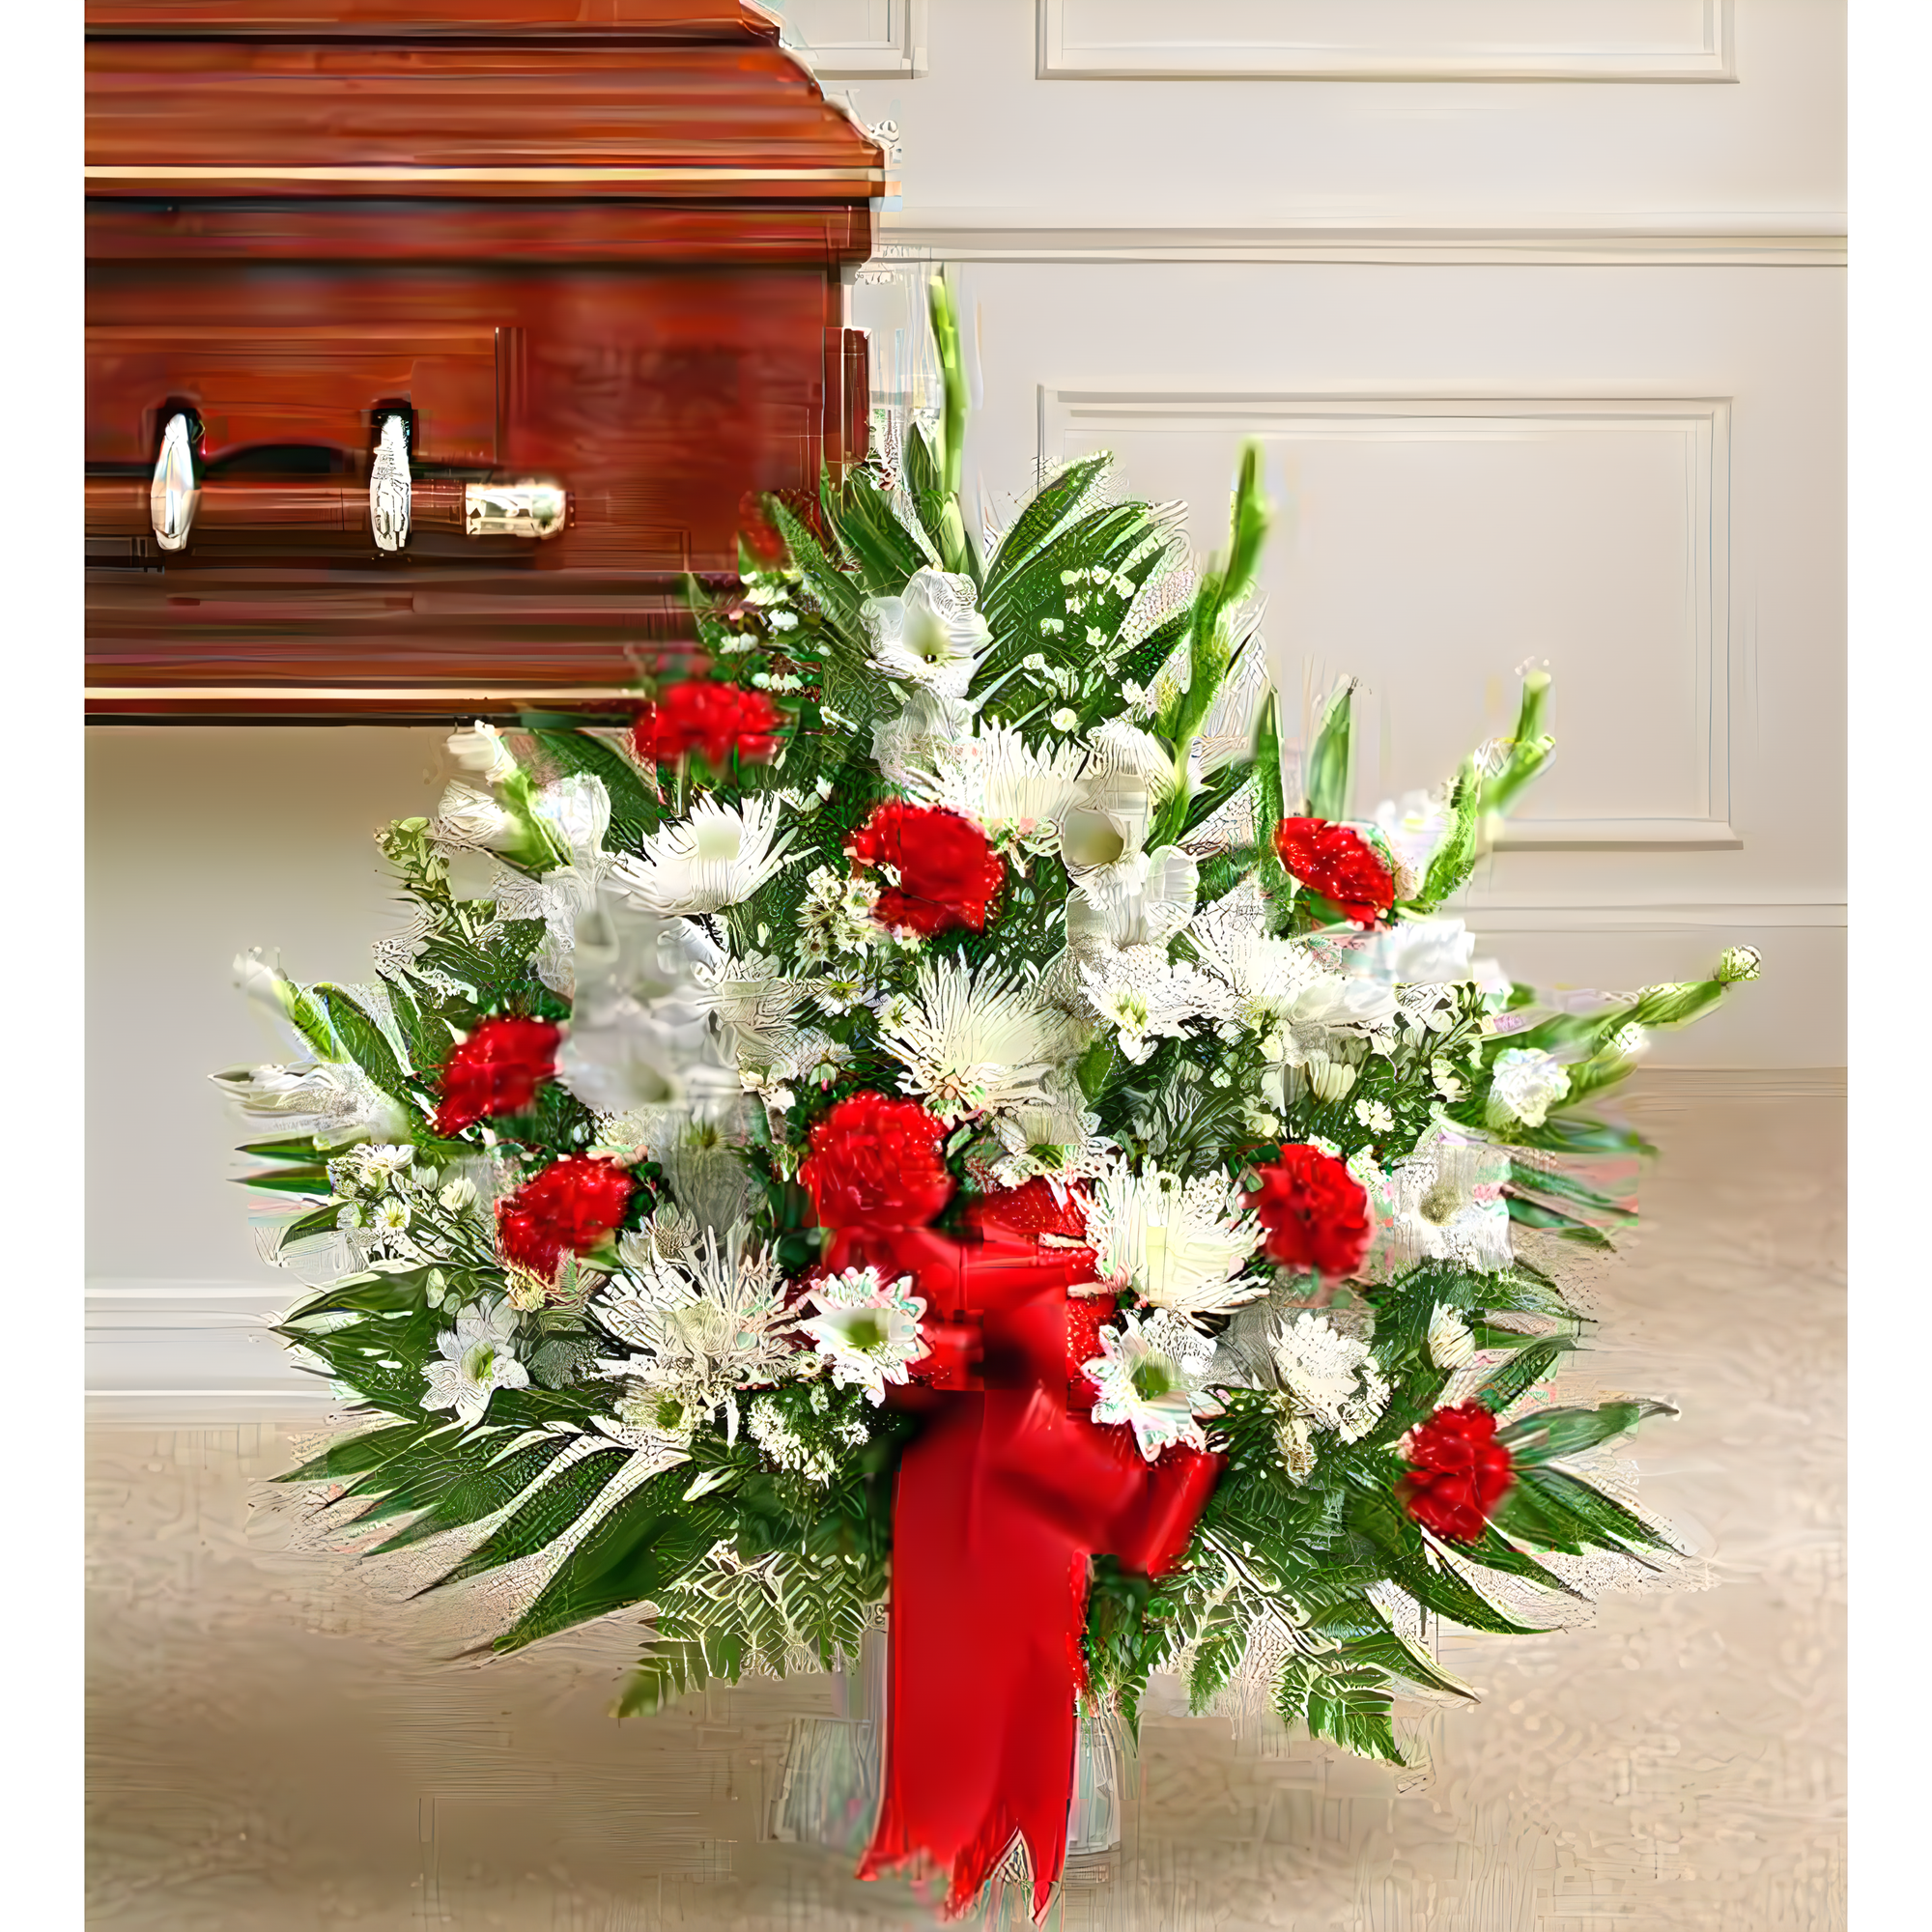 Manhattan Flower Delivery - Tribute Red & White Floor Basket Arrangement - Funeral > For the Service